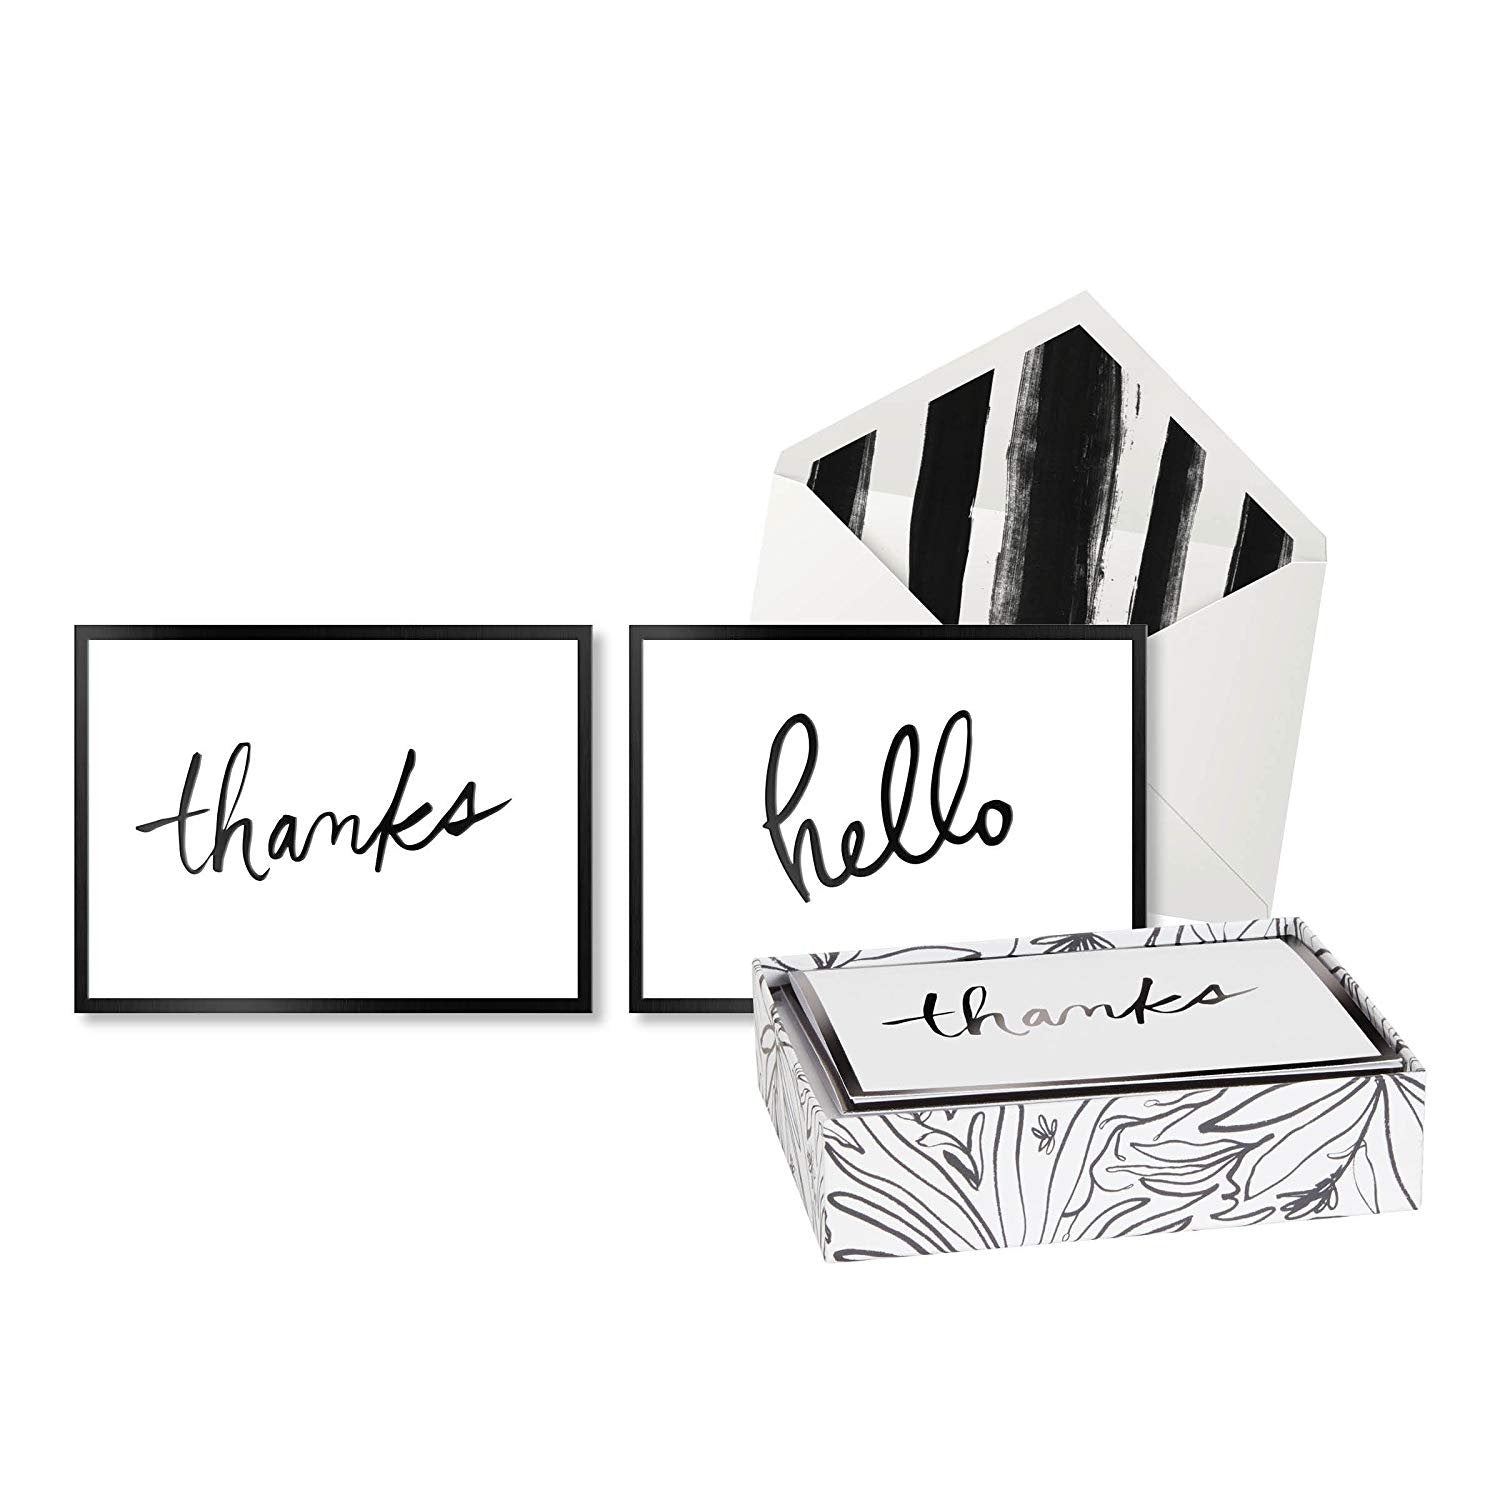 alt="Thanks and hello black and white boxed note cards with coordinating envelopes and box"